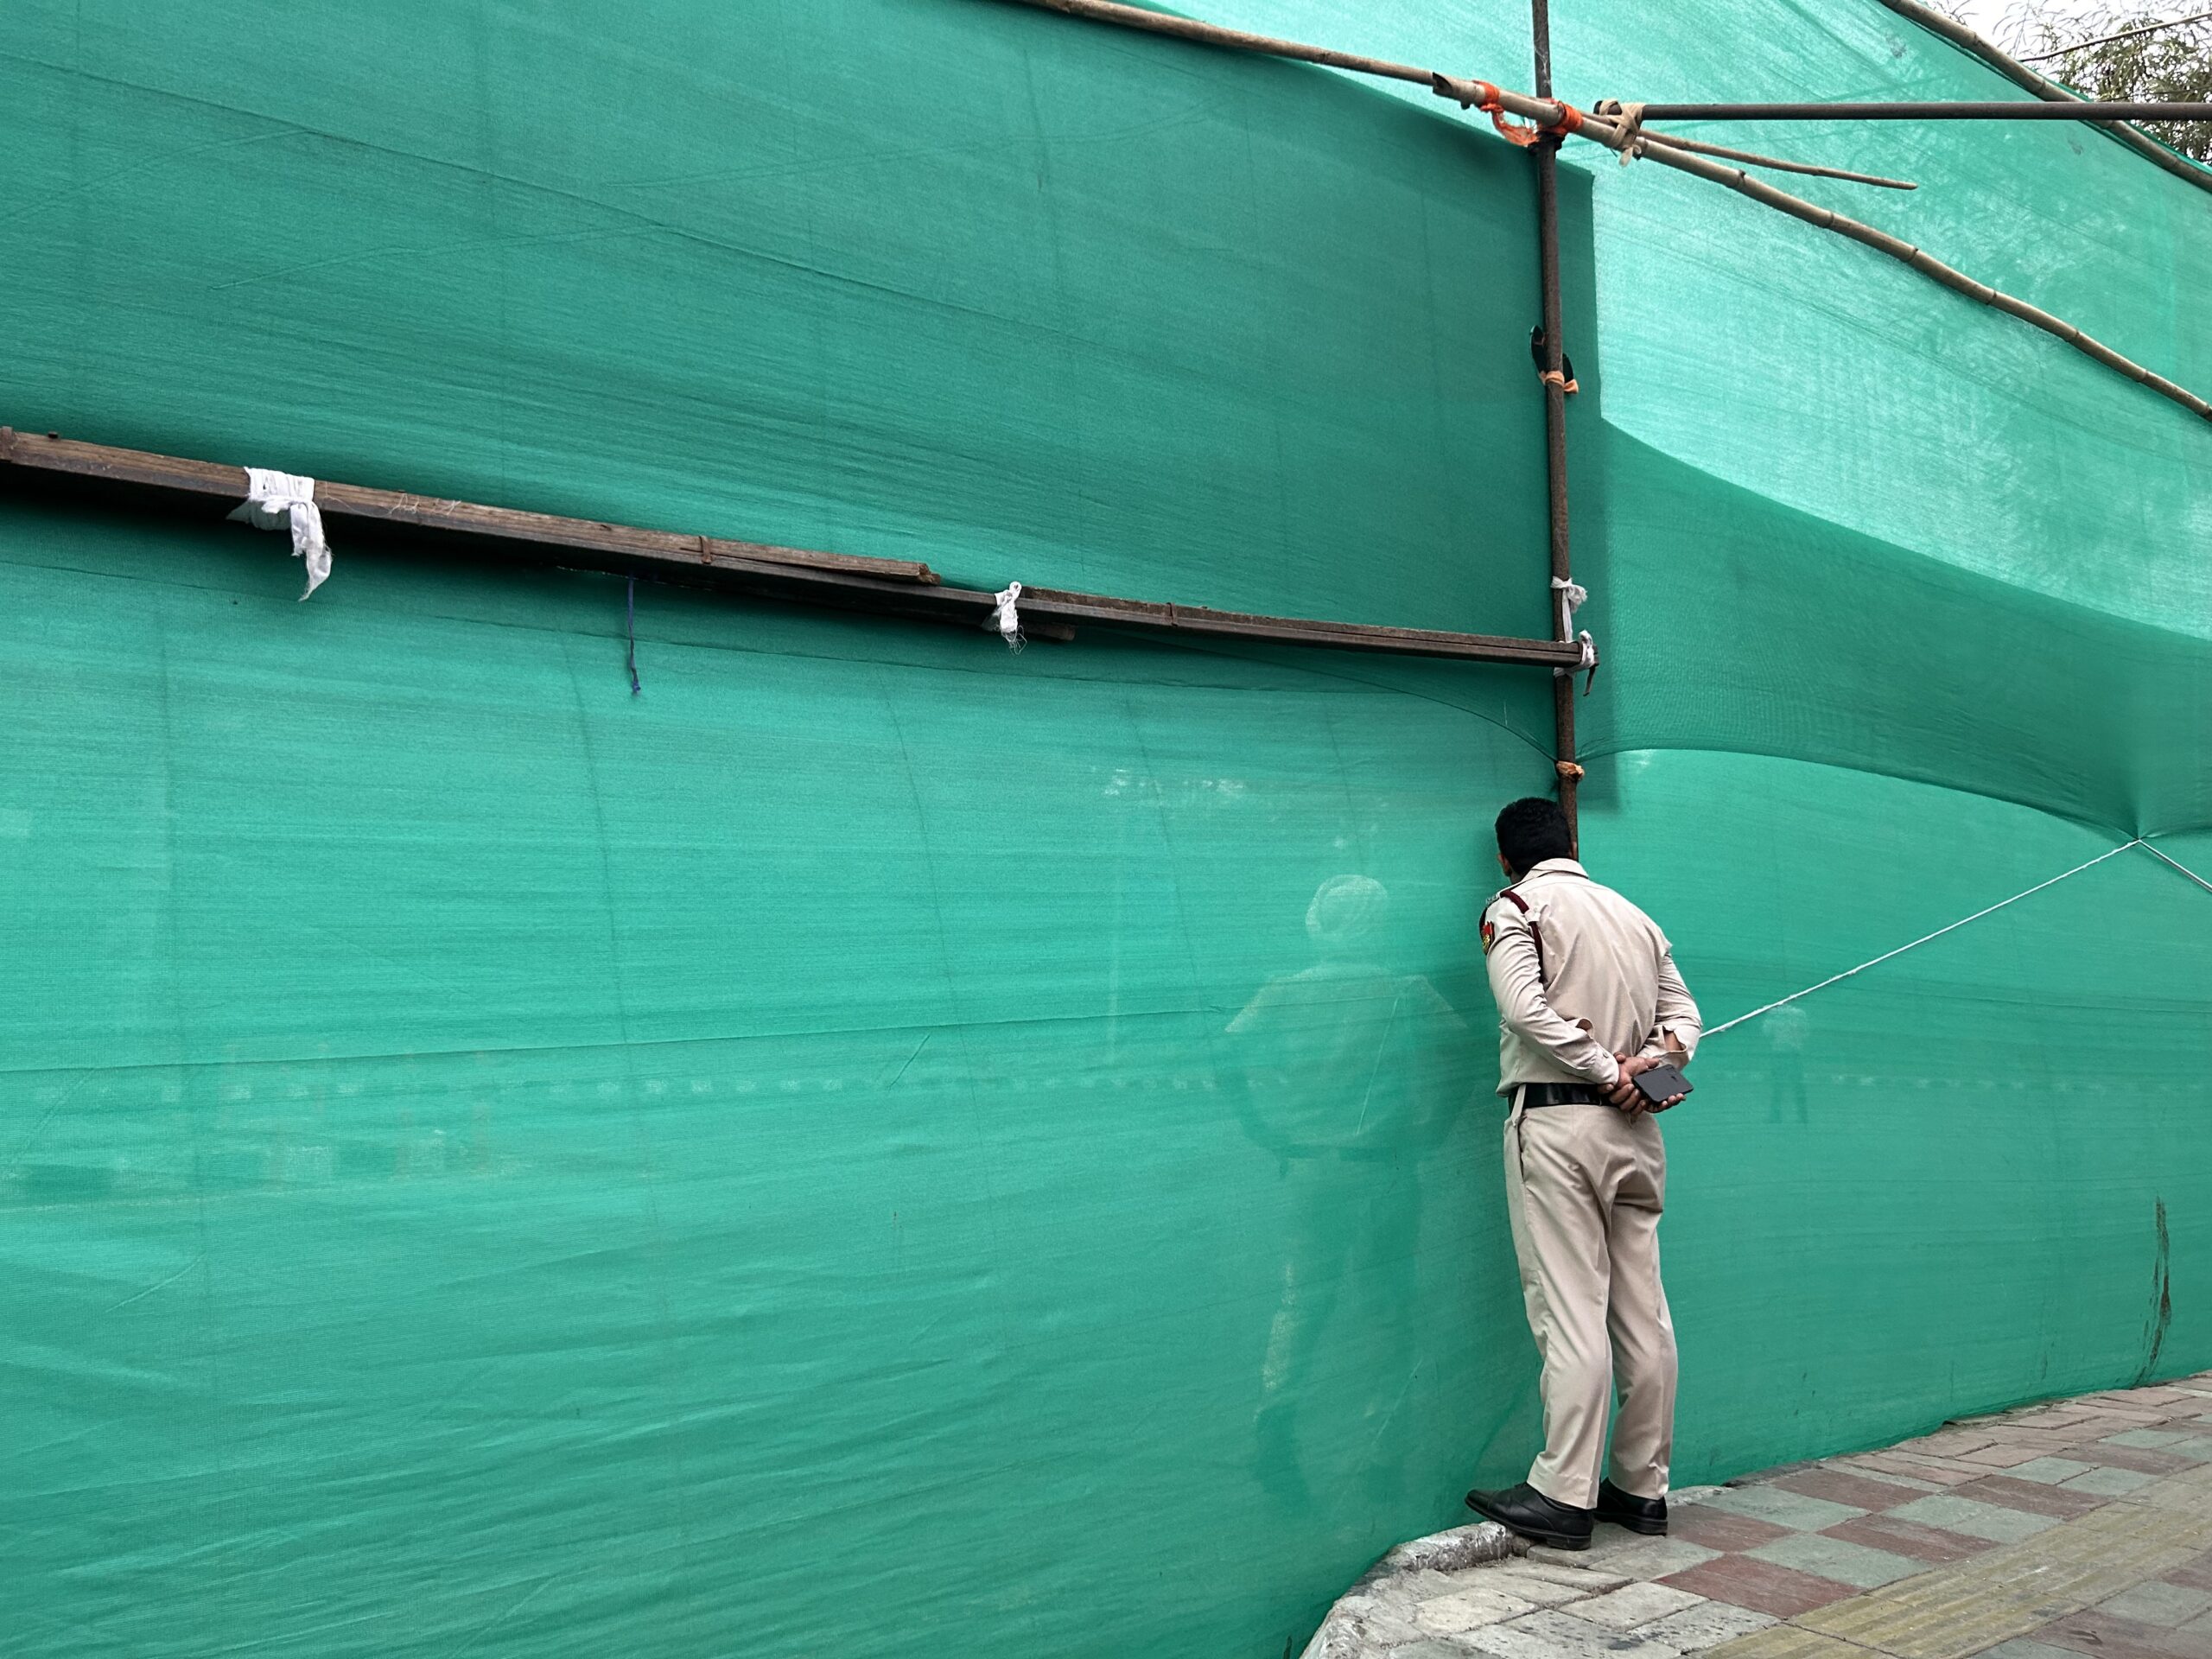 A Delhi Police official looks through the green curtain during the VIP movement